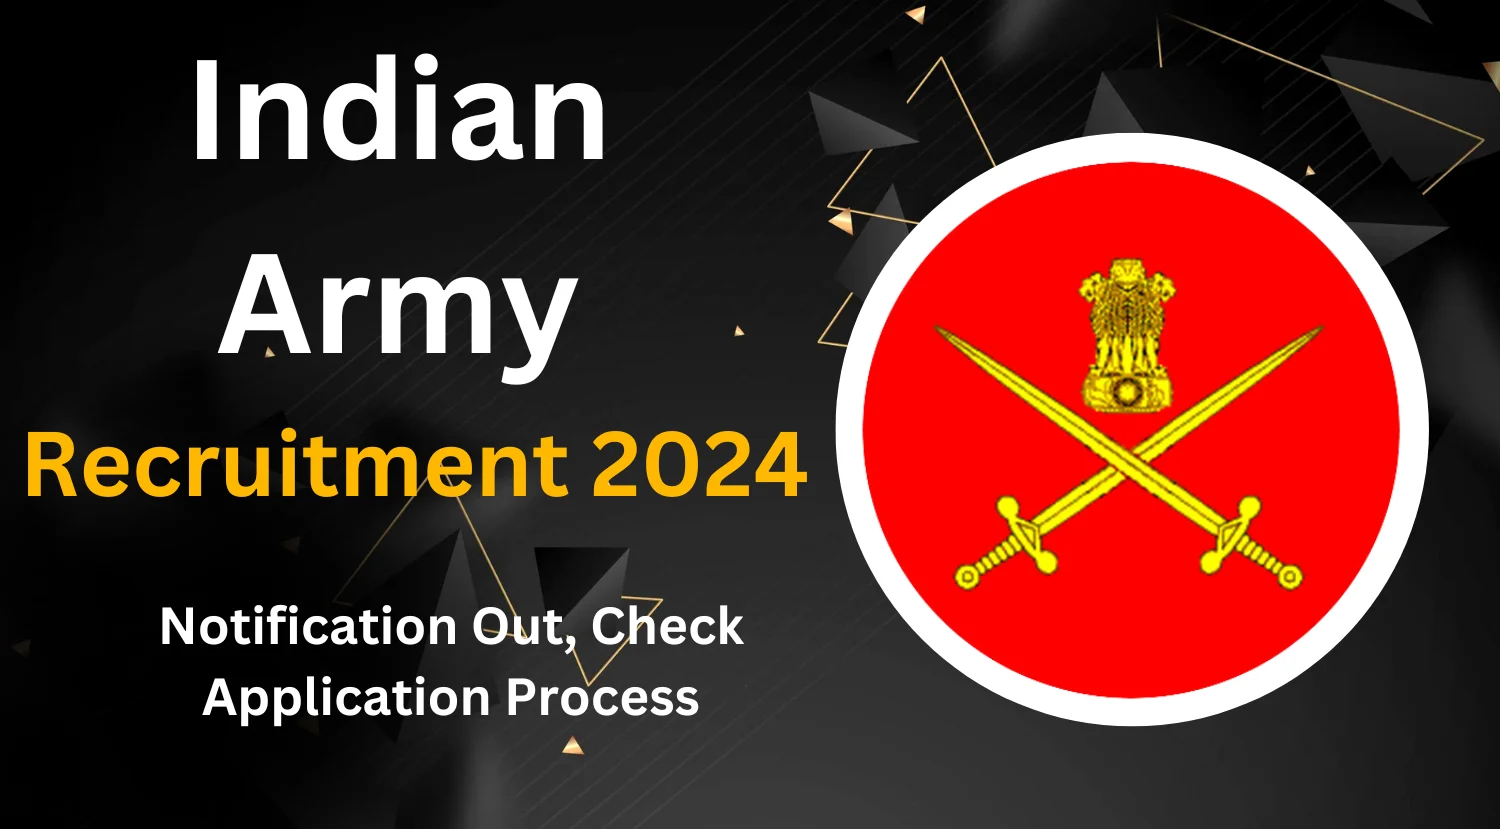 Indian Army Recruitment 2024 Technical Entry Scheme